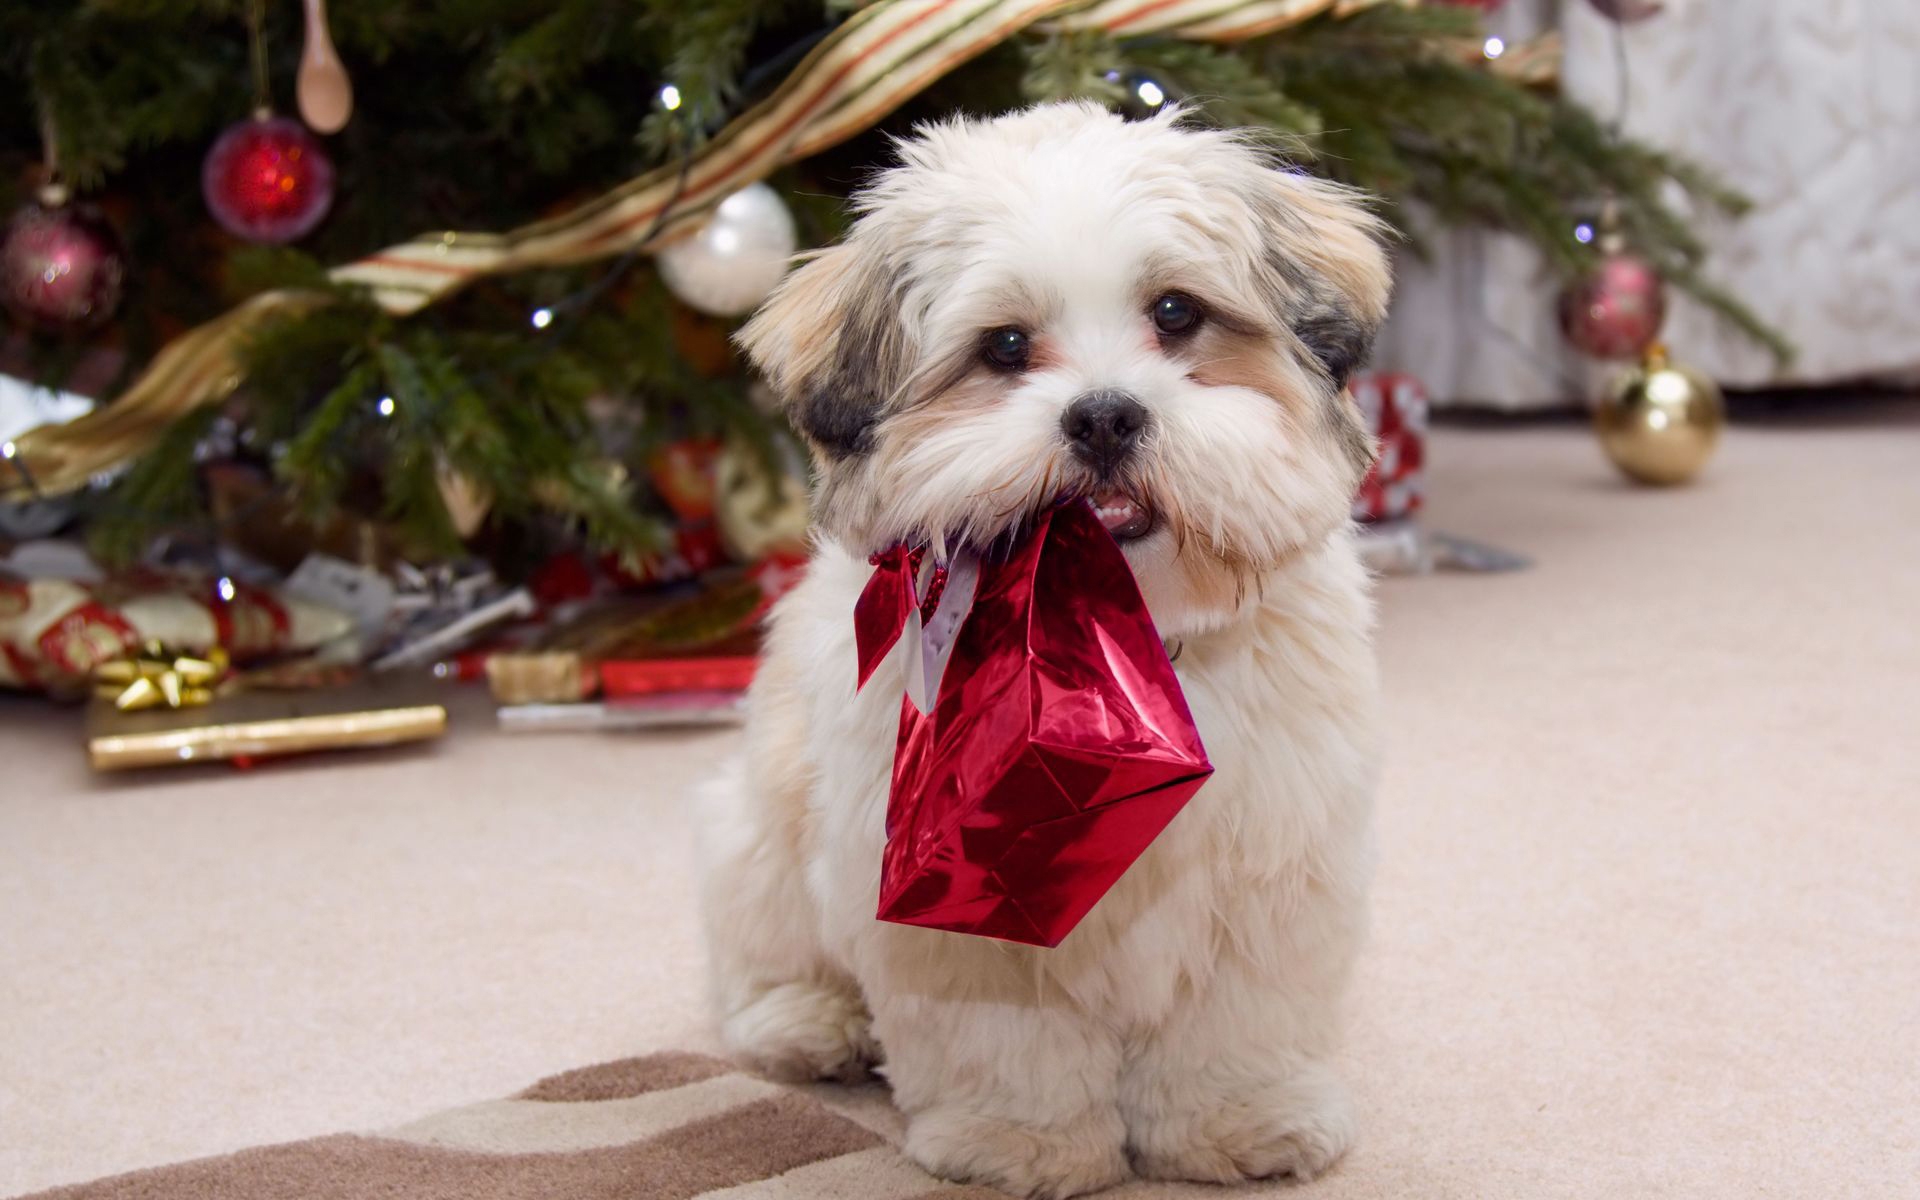 Shih tzu puppy for Christmas wallpapers and images - wallpapers